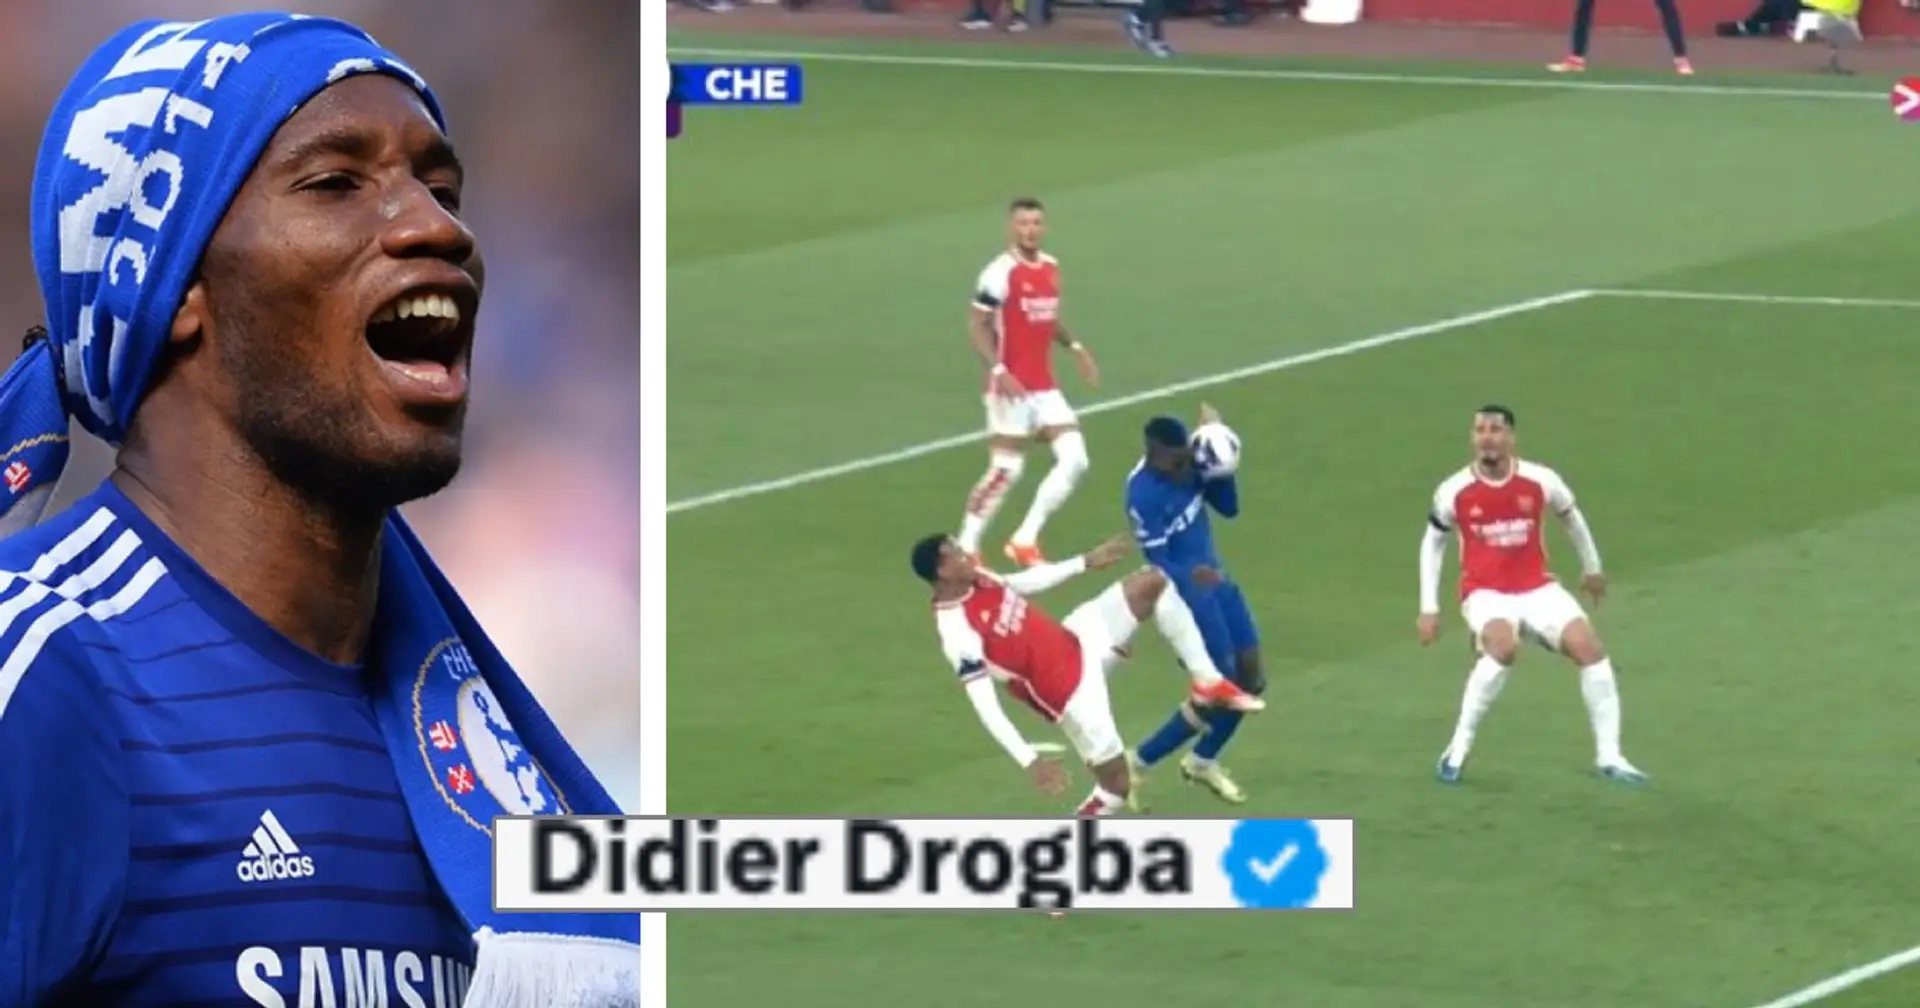 Drogba begins to trend among Arsenal fans after Chelsea demolition - not because of Jackson